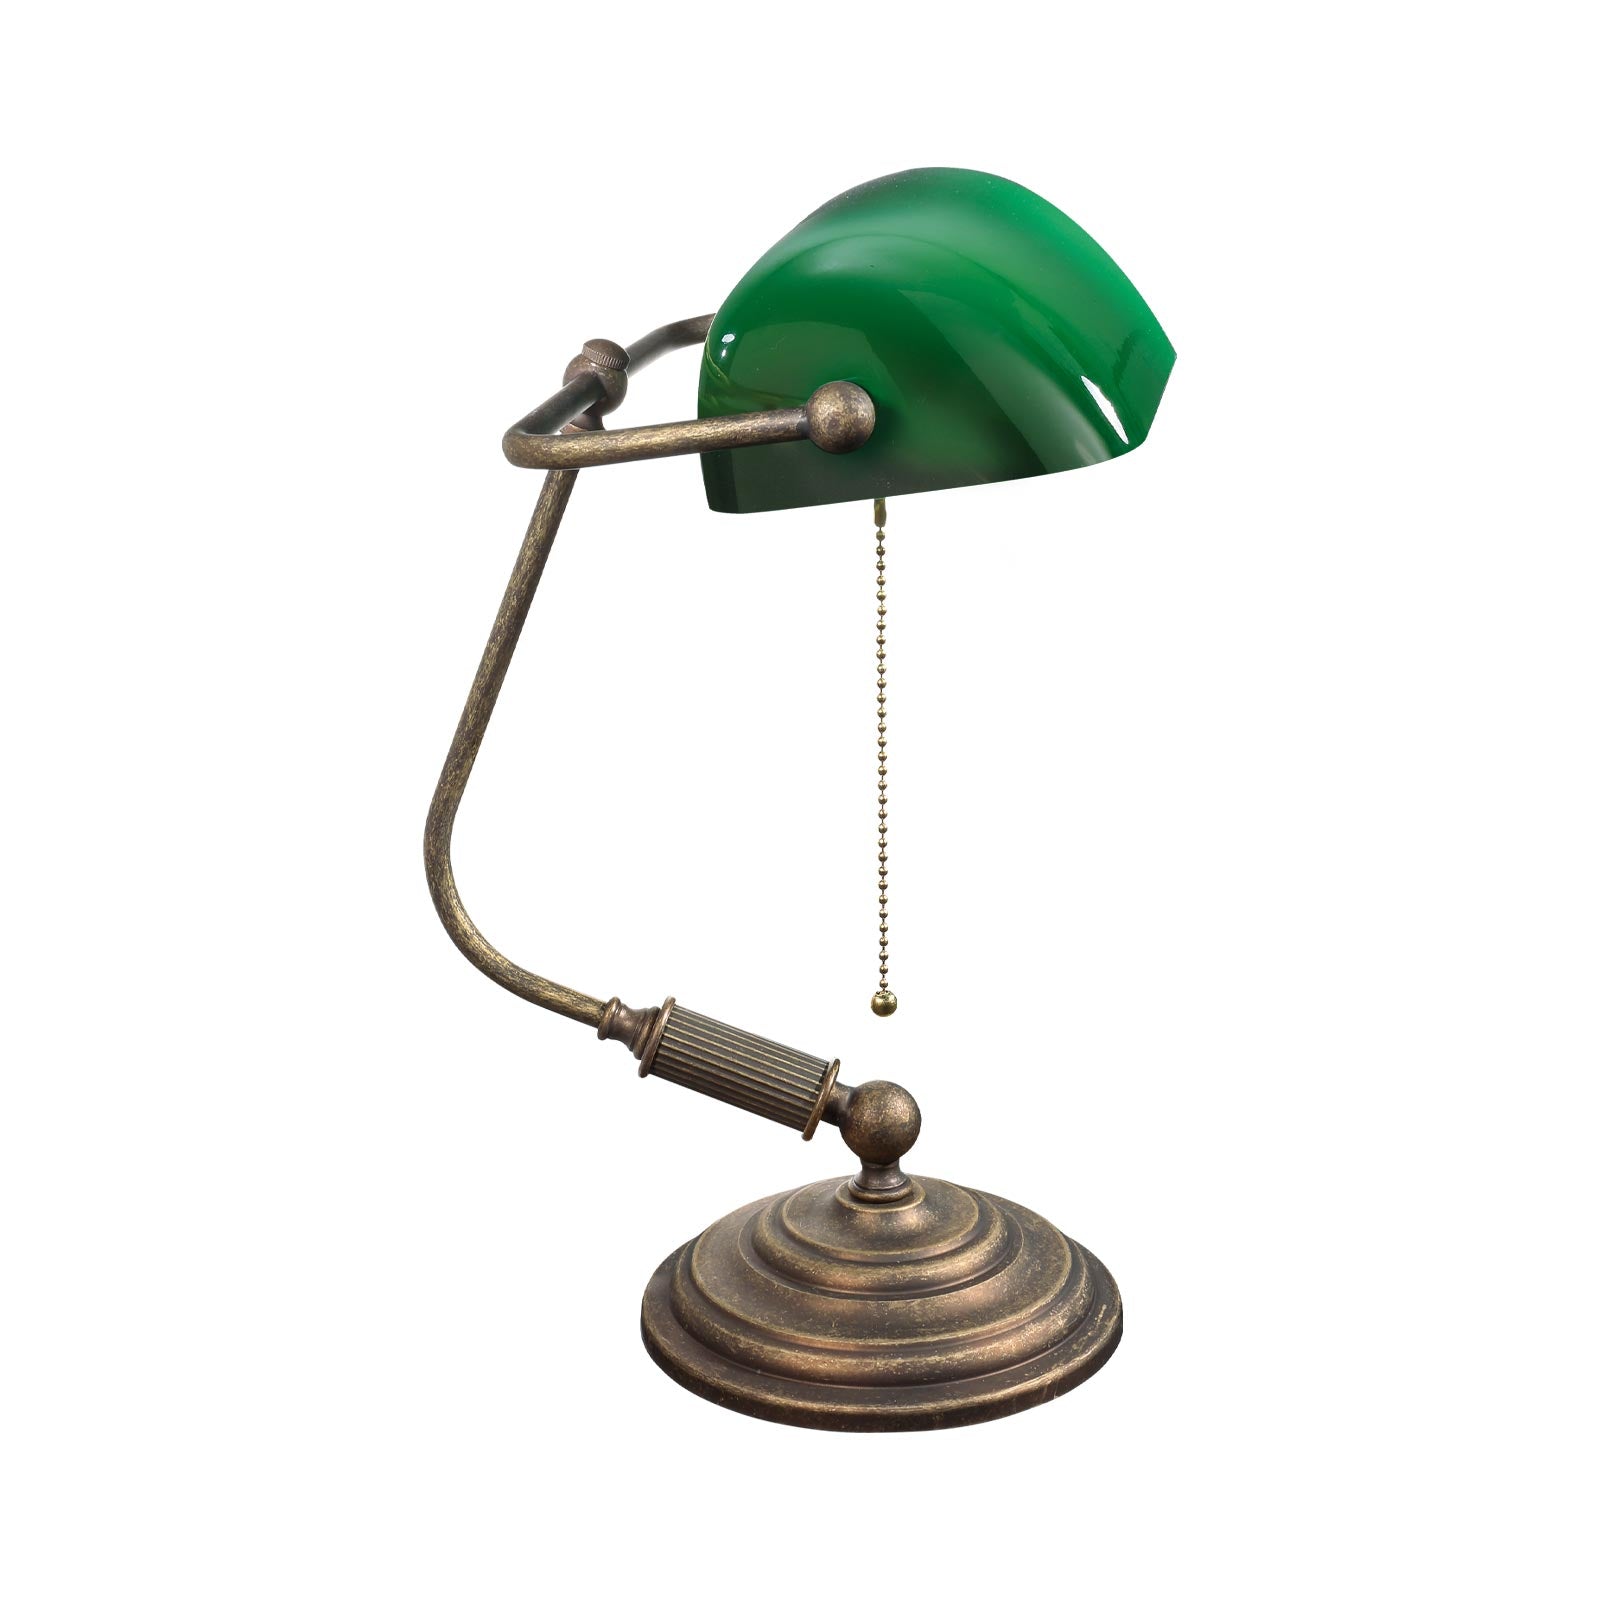 Antique Brass Bankers Lamp With Green Glass Shade